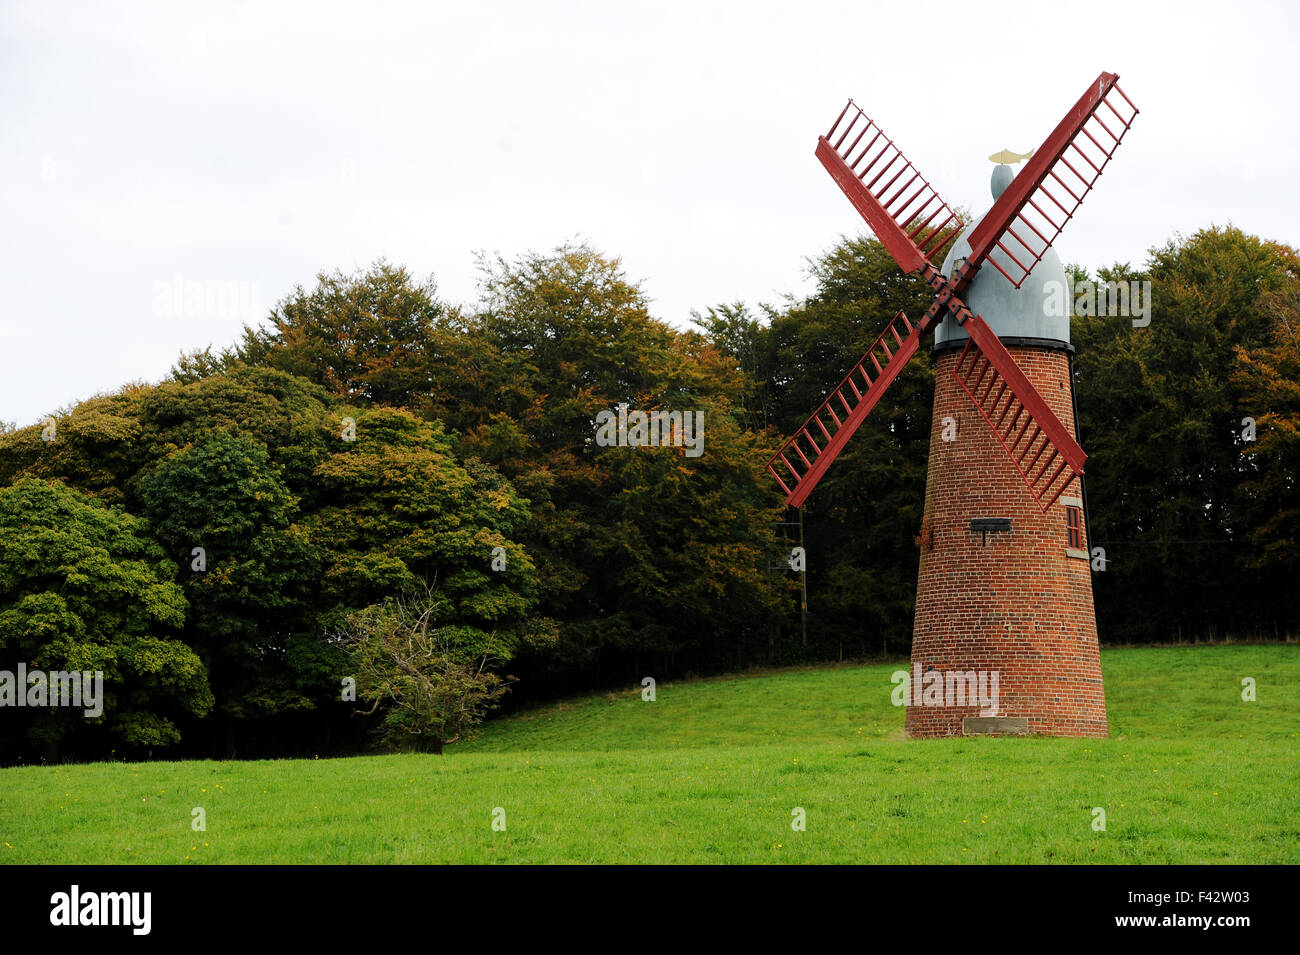 Haigh windmill stands among the Autumn leaves, Wigan, Lancashire. Picture by Paul Heyes, Wednesday October 14, 2015. Stock Photo